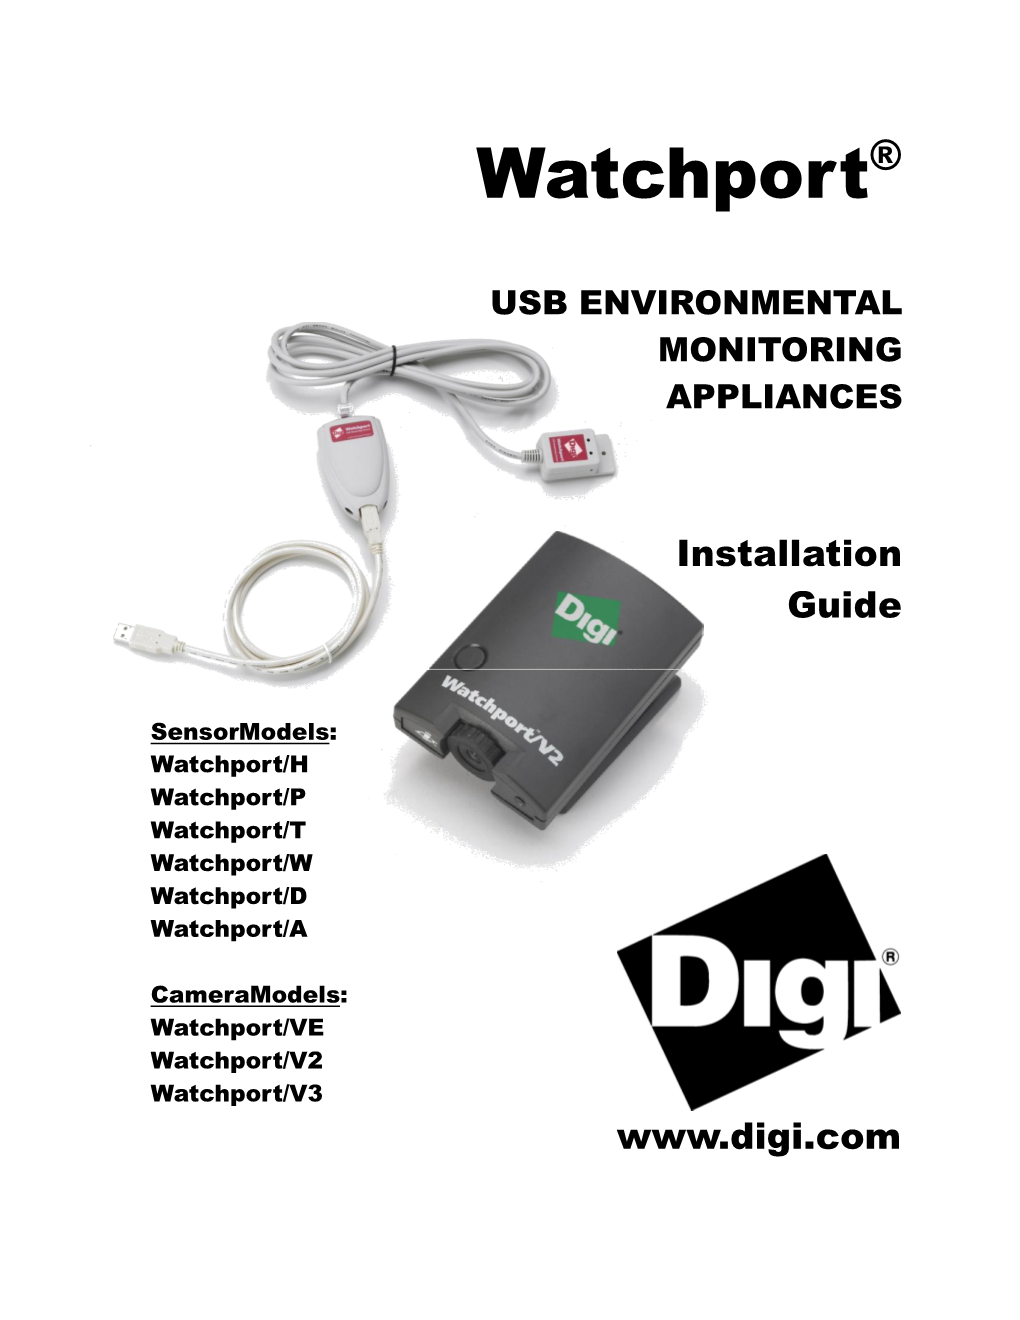 Watchport® Series Is the First Line of Plug-And-Play USB Devices for 24/7 Environmental Monitoring